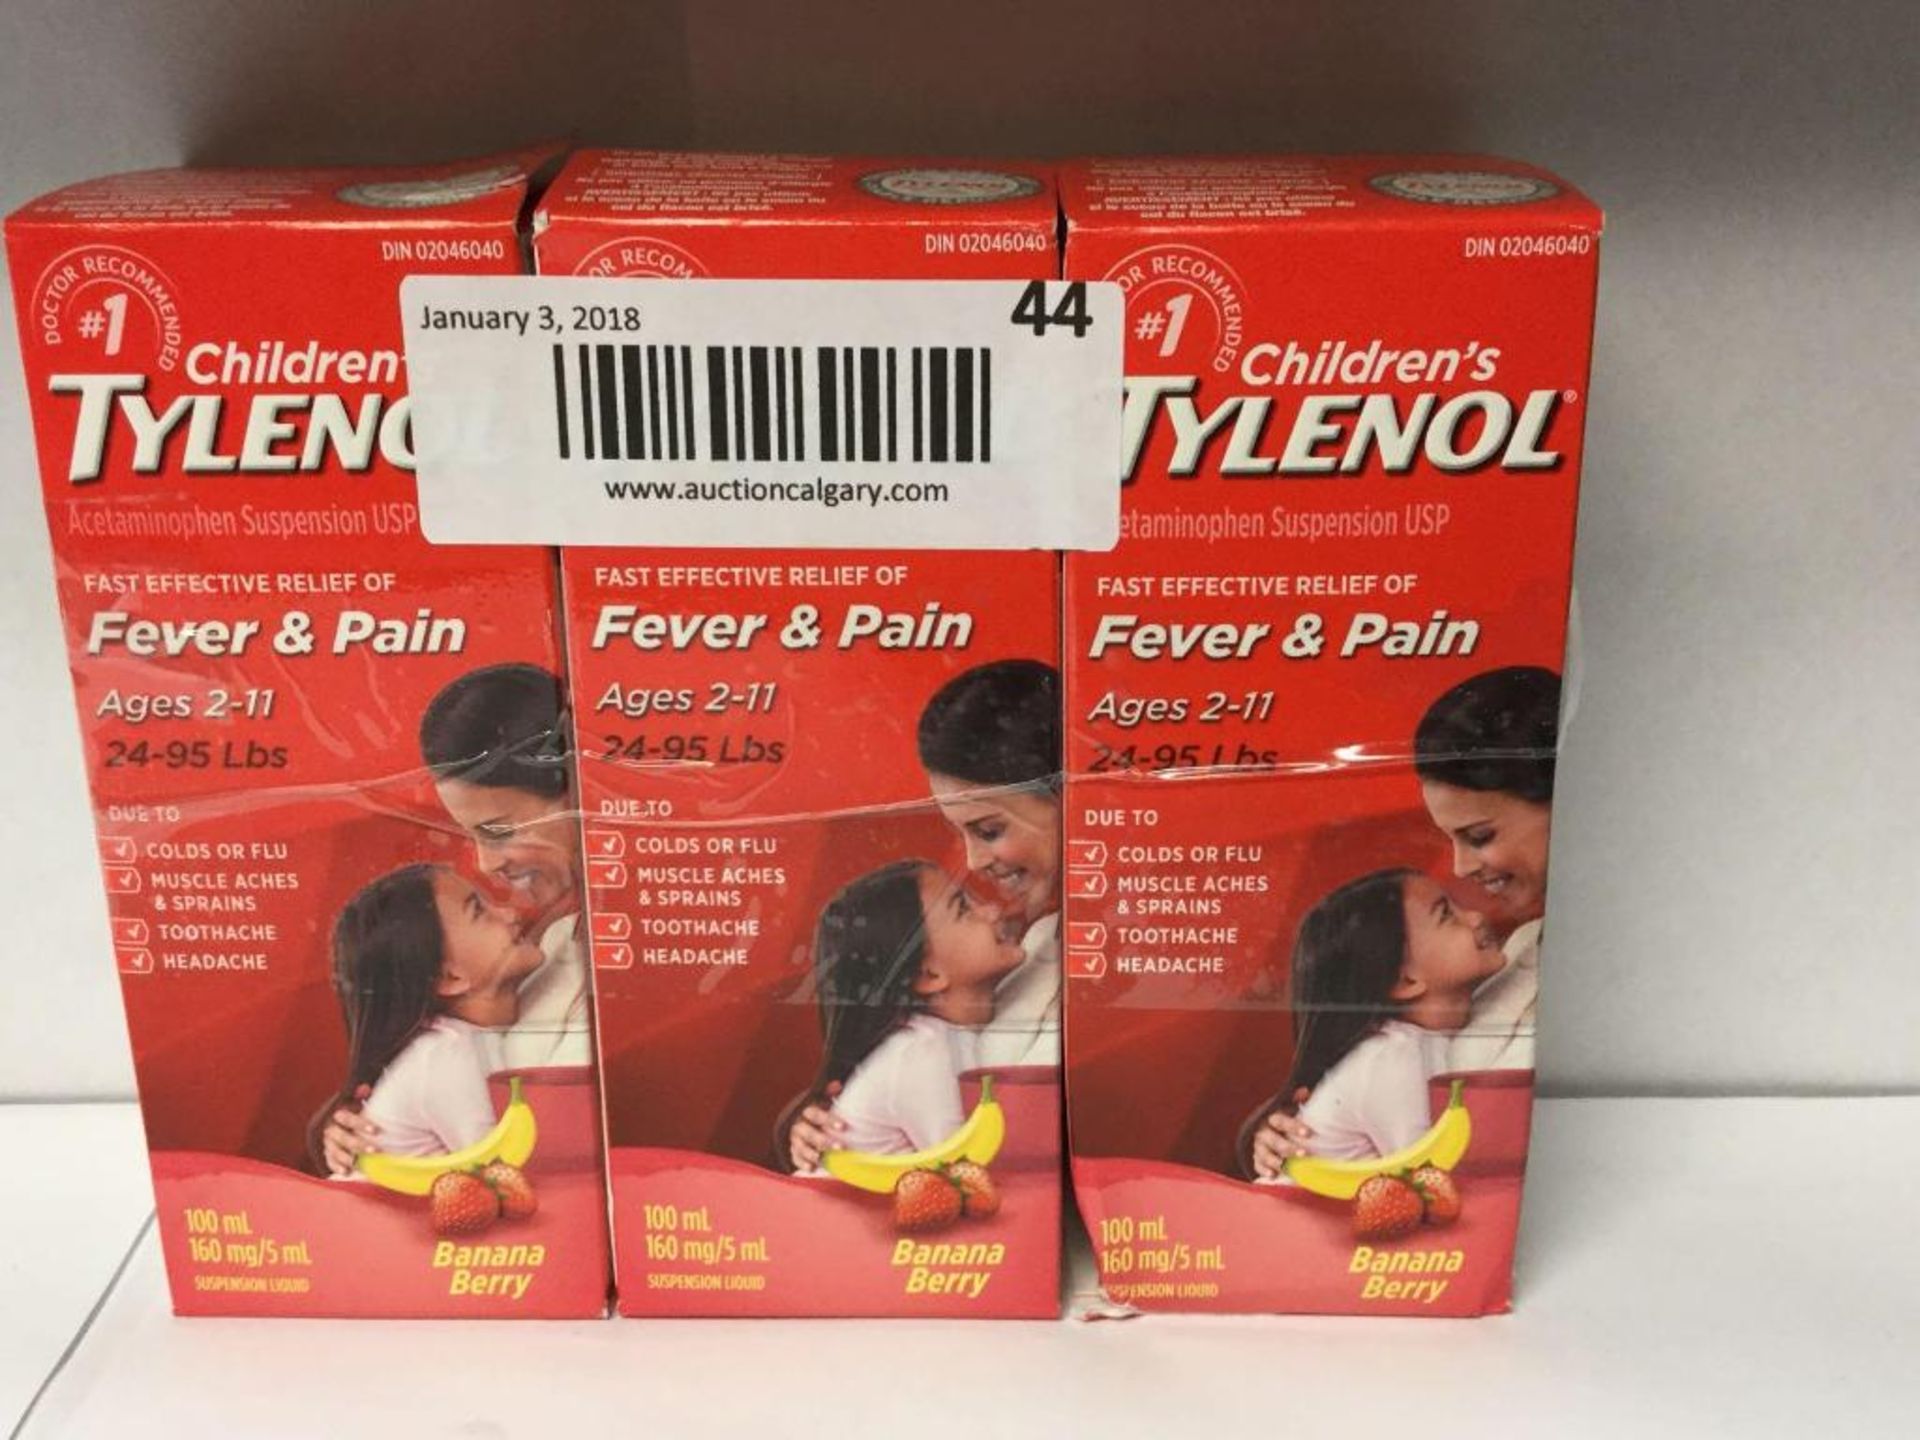 lot of 3 x 100 mL Children's Tylenol Fever and Pain Medication